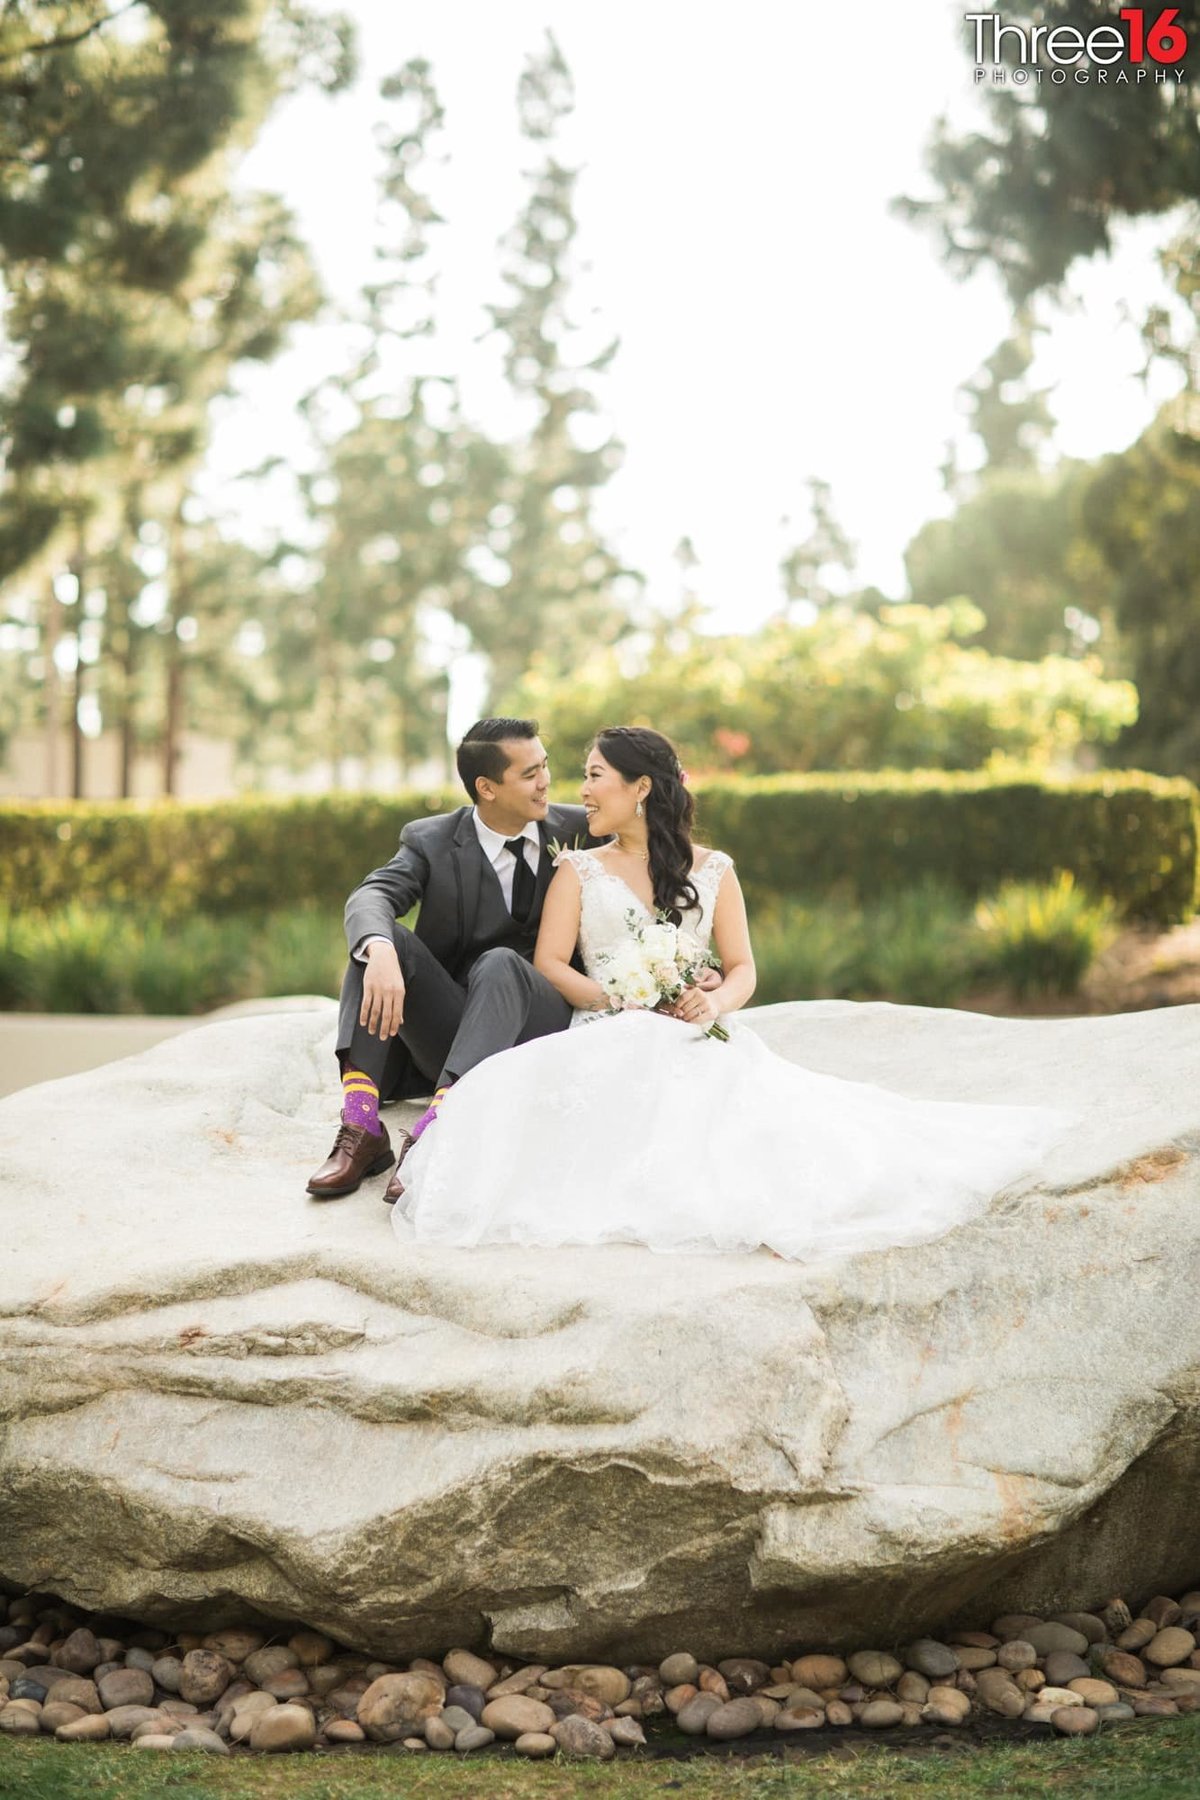 Bride and Groom gaze at each other while sitting on a rock together